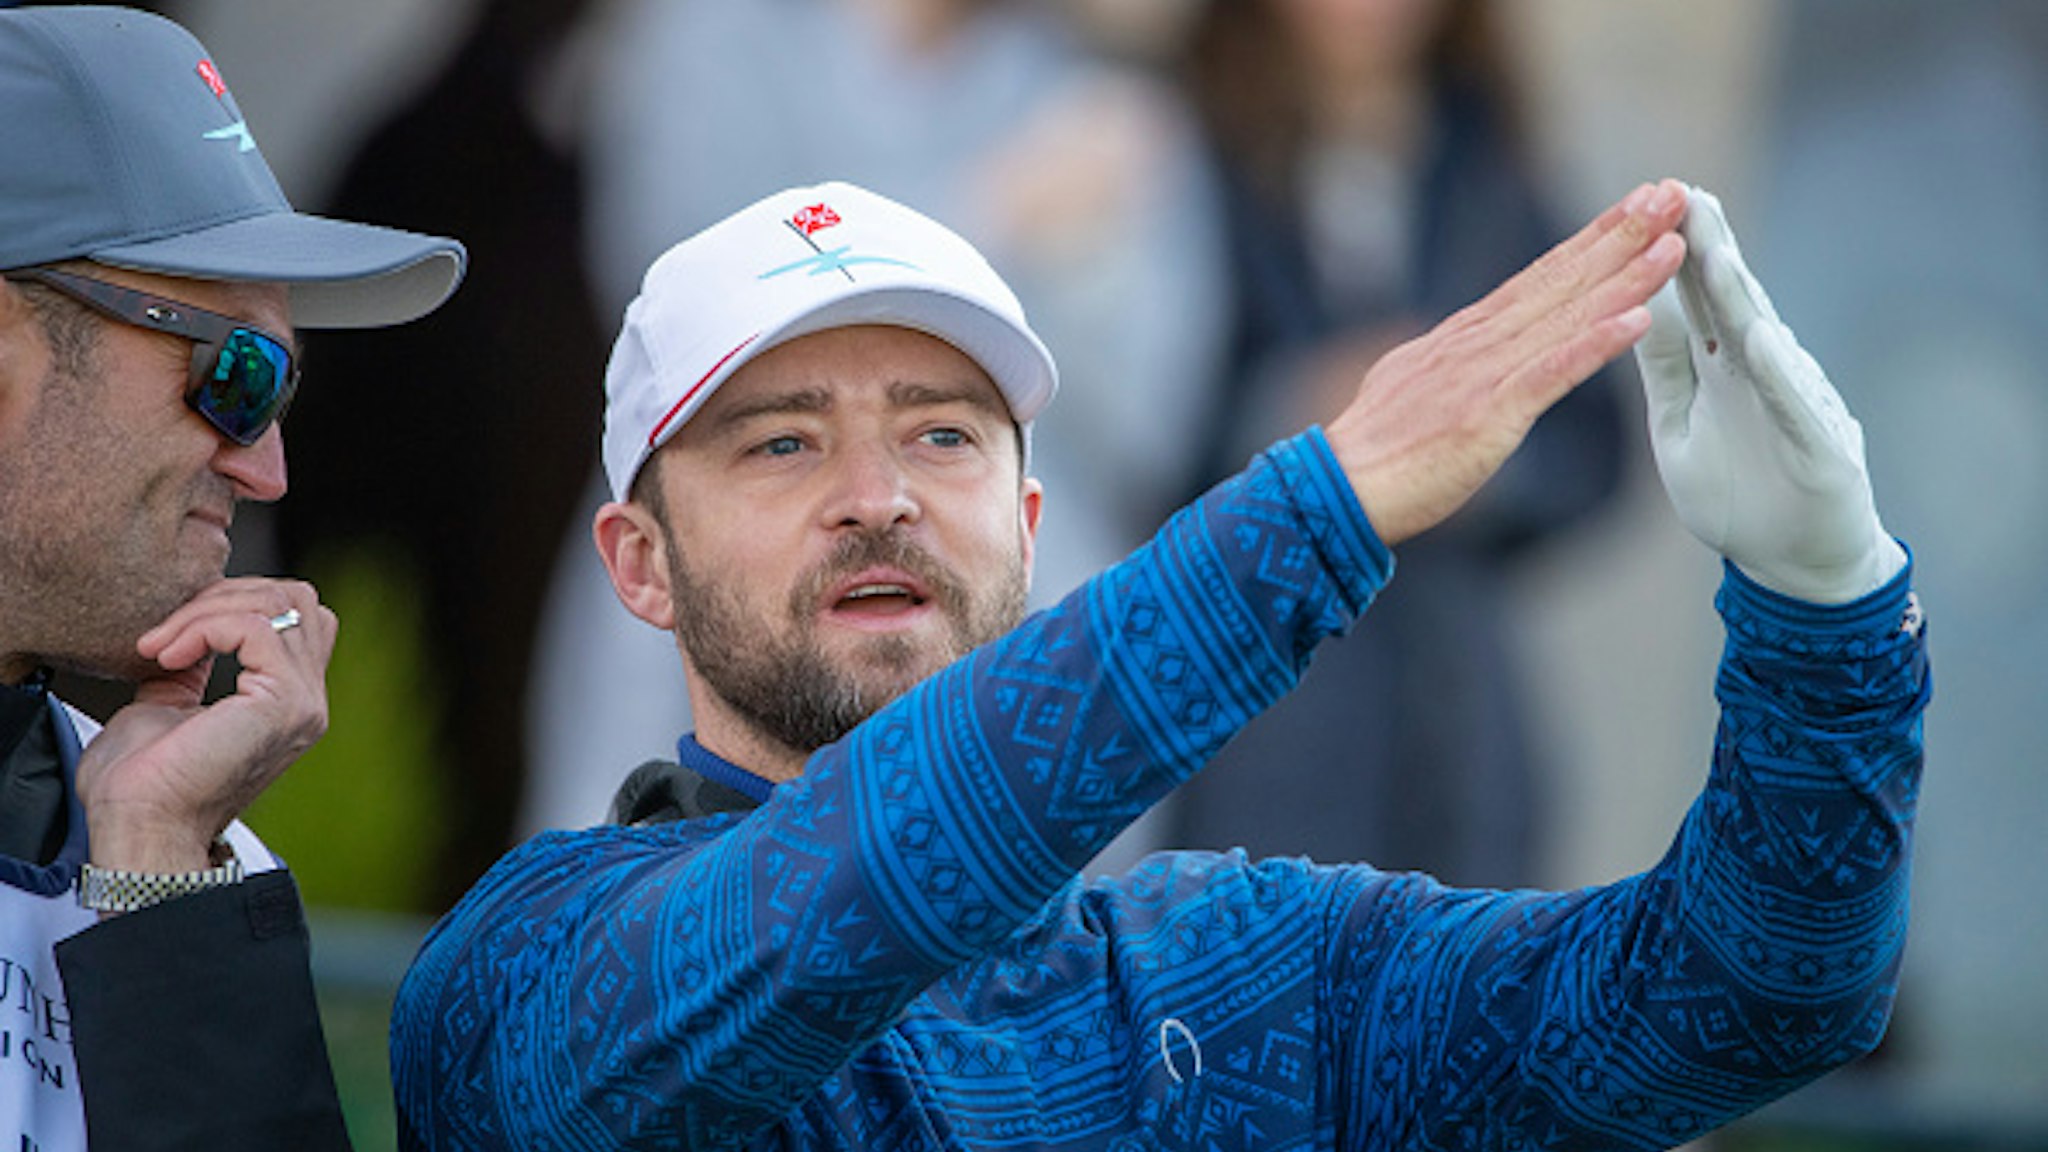 Justin Timberlake chats with his caddy before teeing off during day three of the Alfred Dunhill Links Championship at St Andrews.